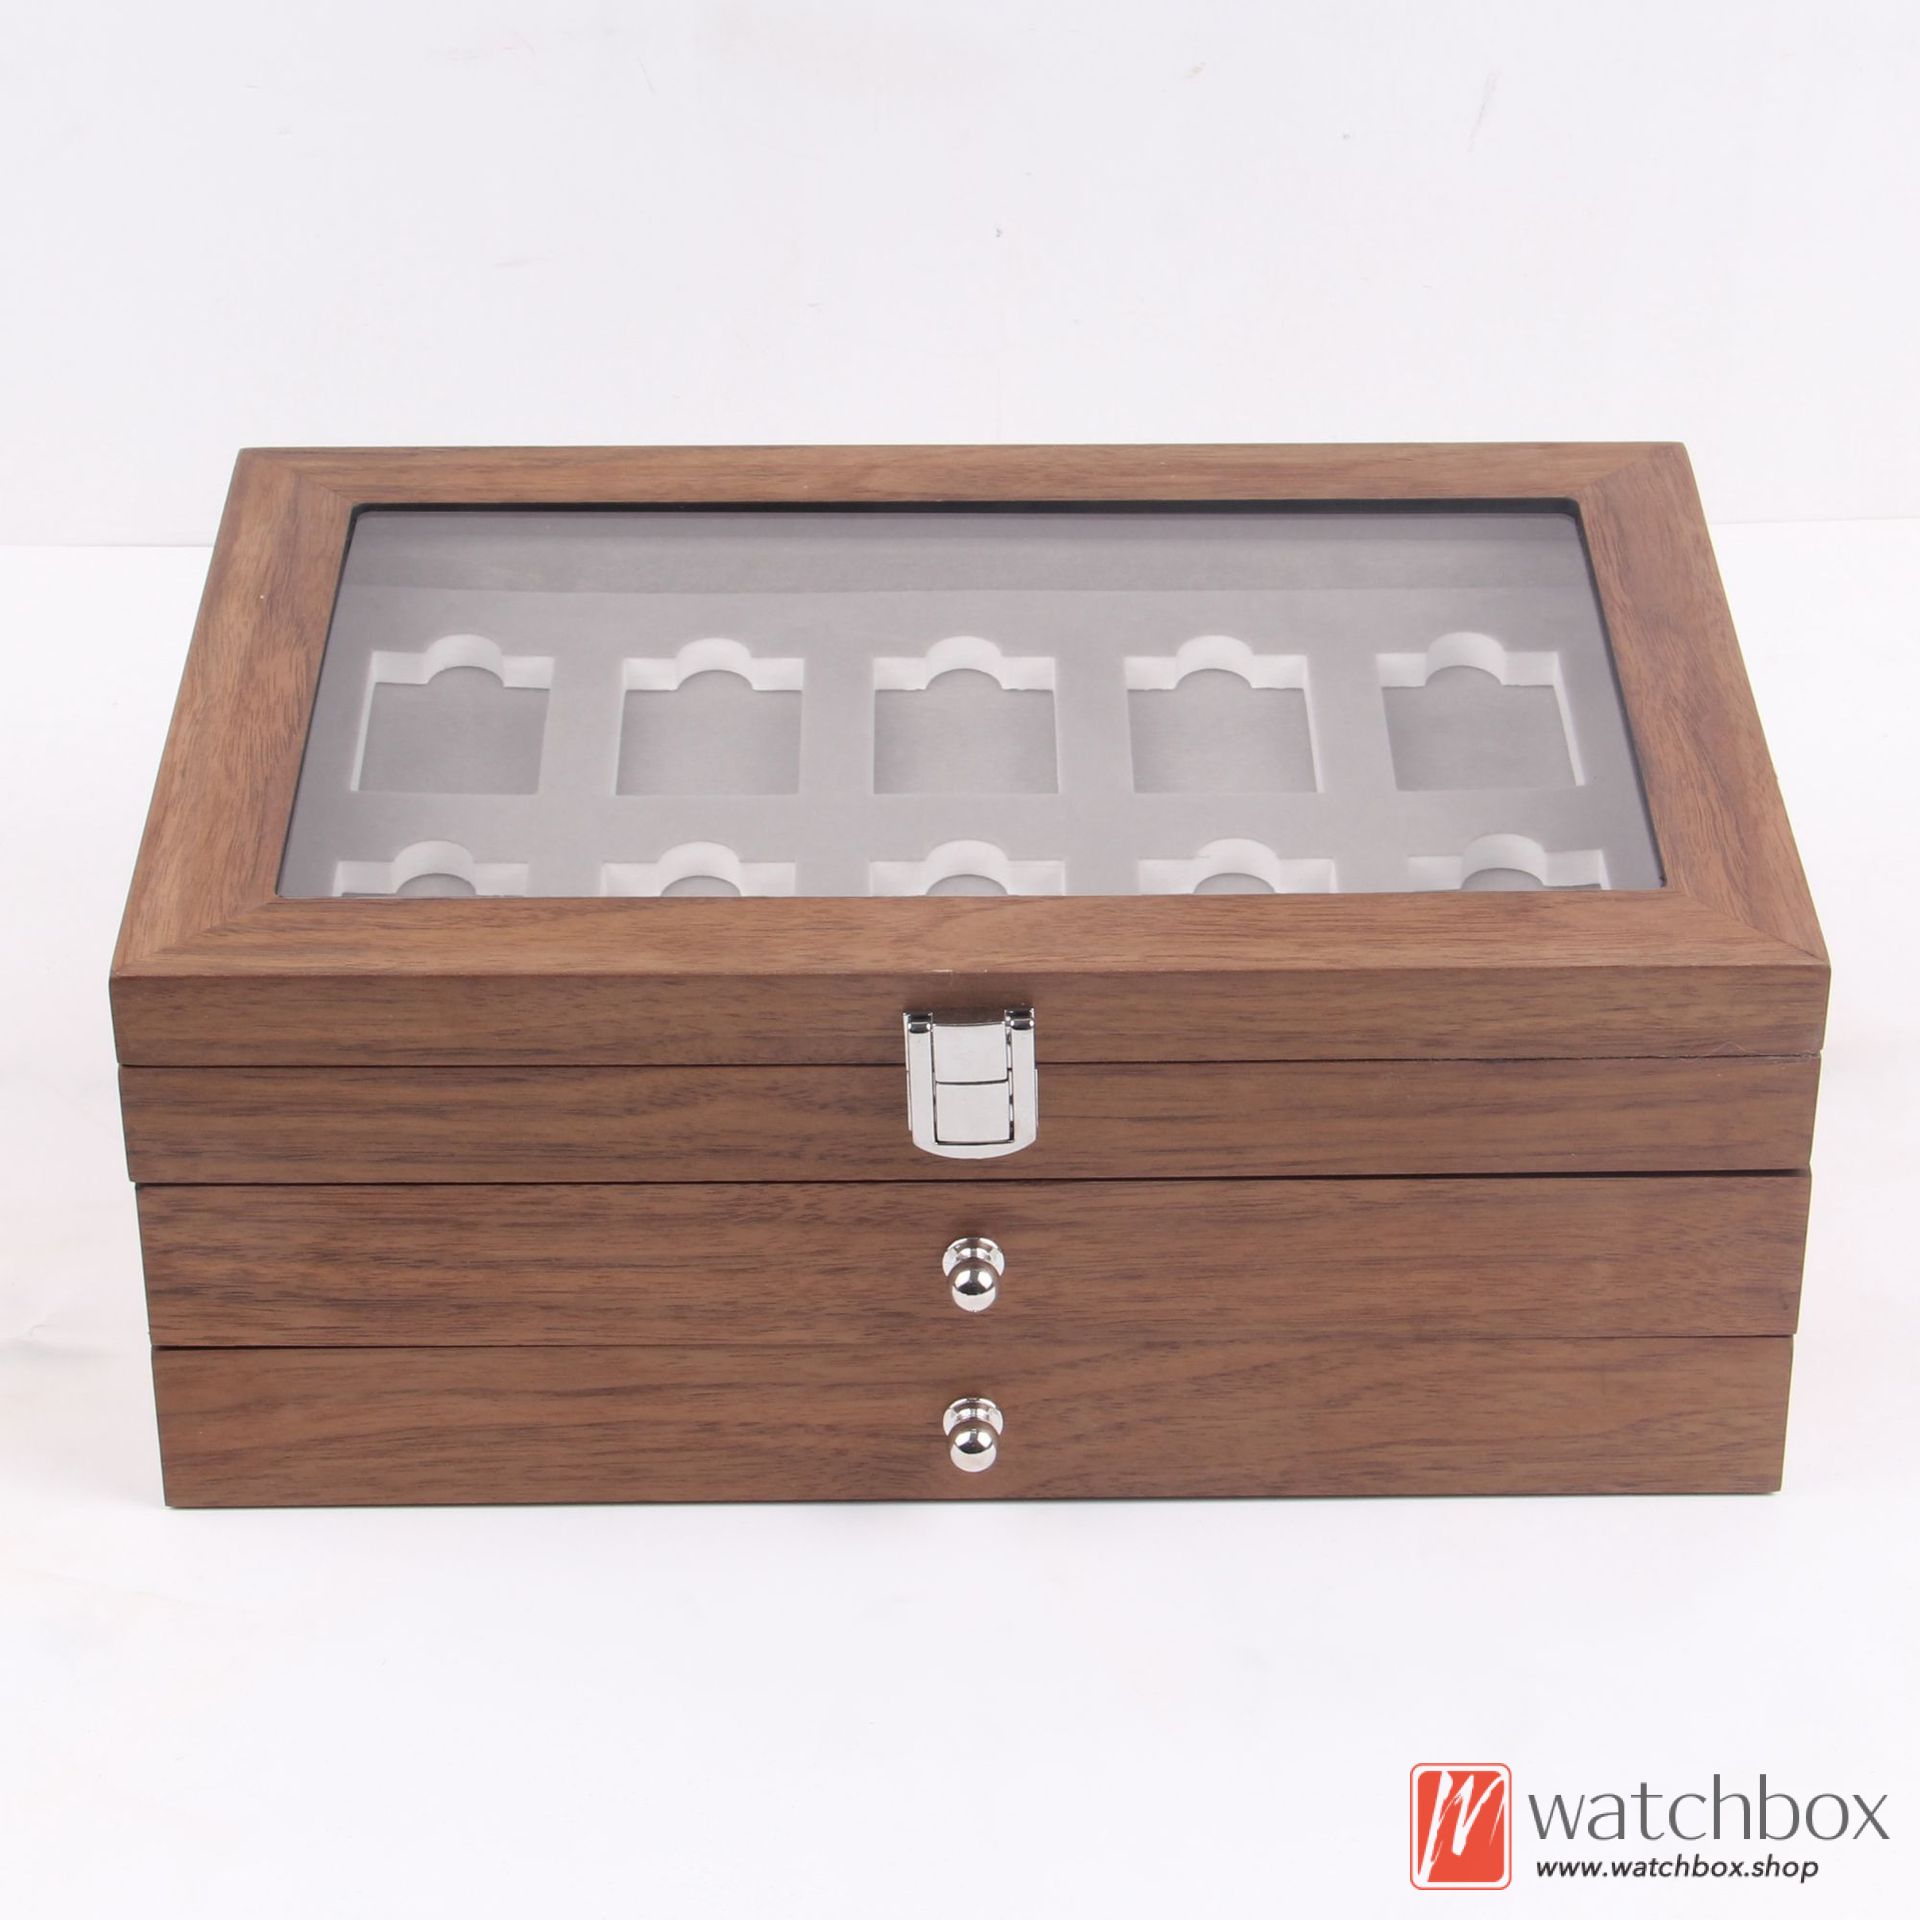 30 Grids Wooden Lighter Collect Organizer Display Storage Box Collection Gift Box